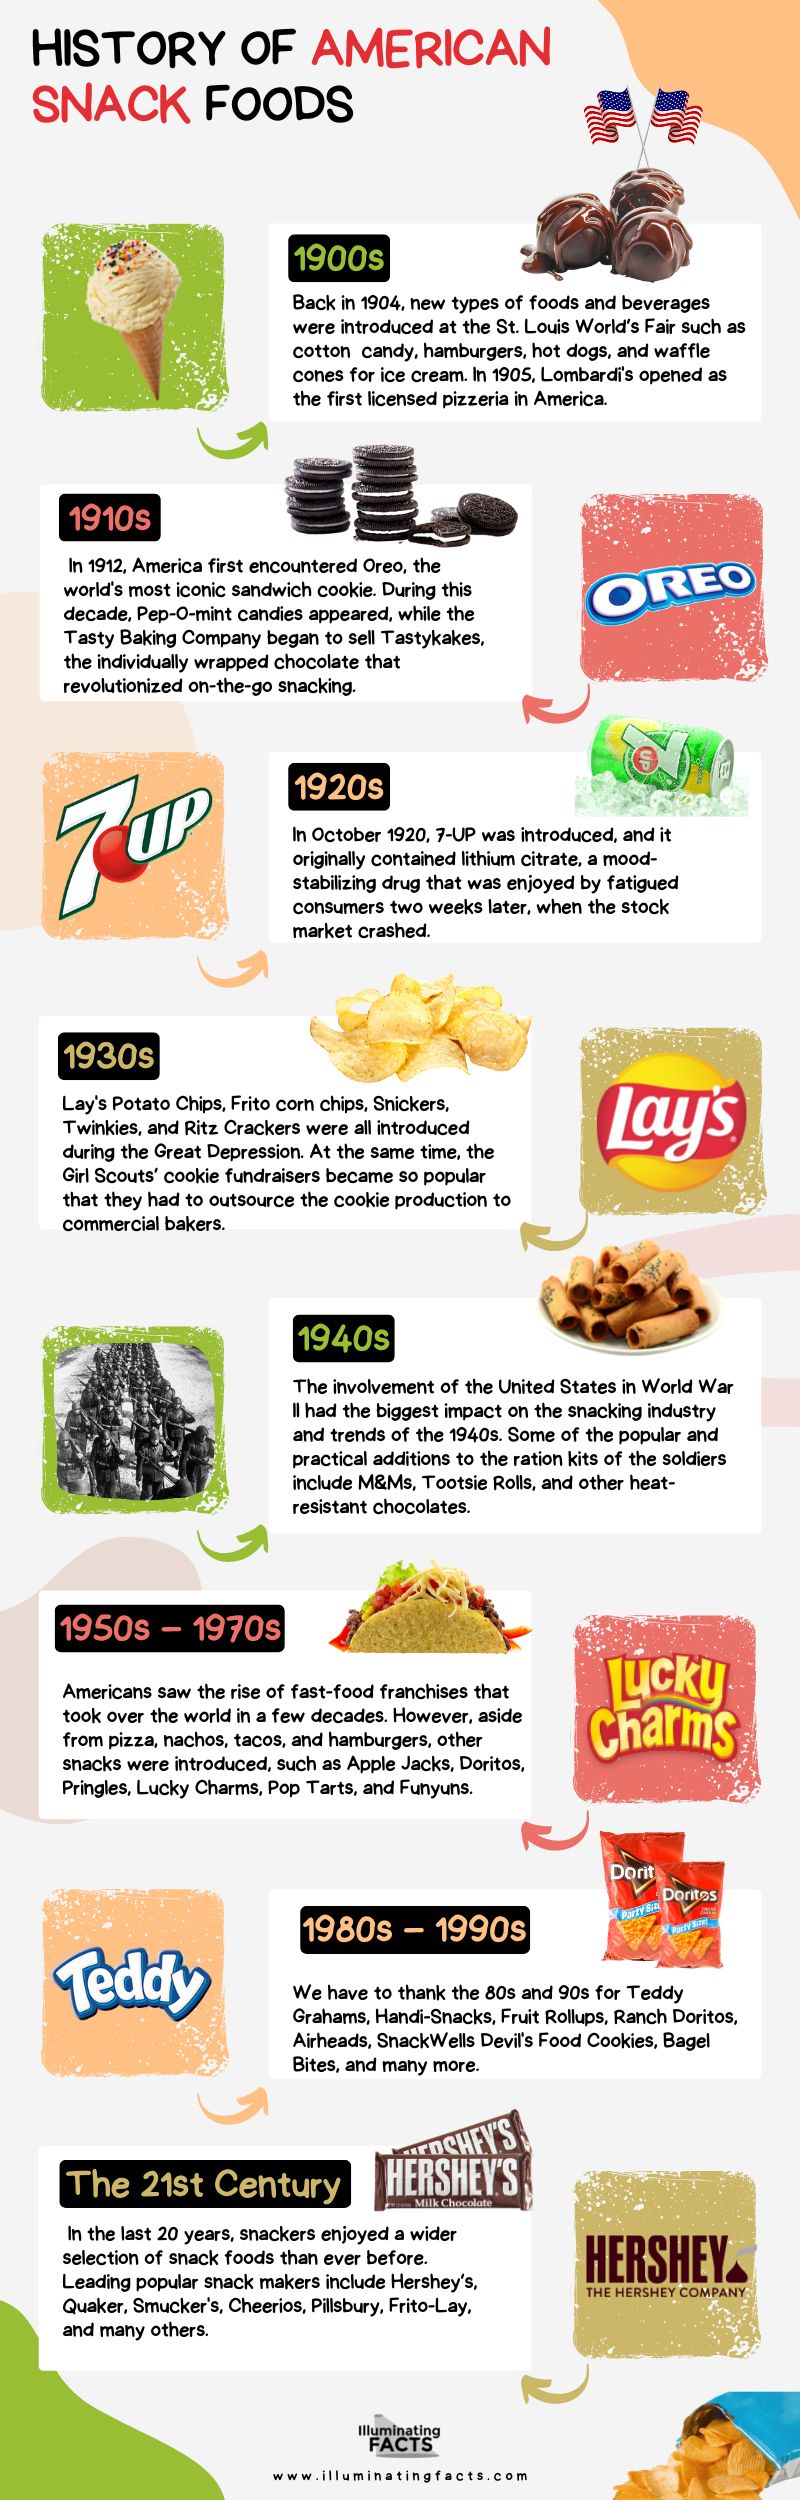 History of American Snack Foods